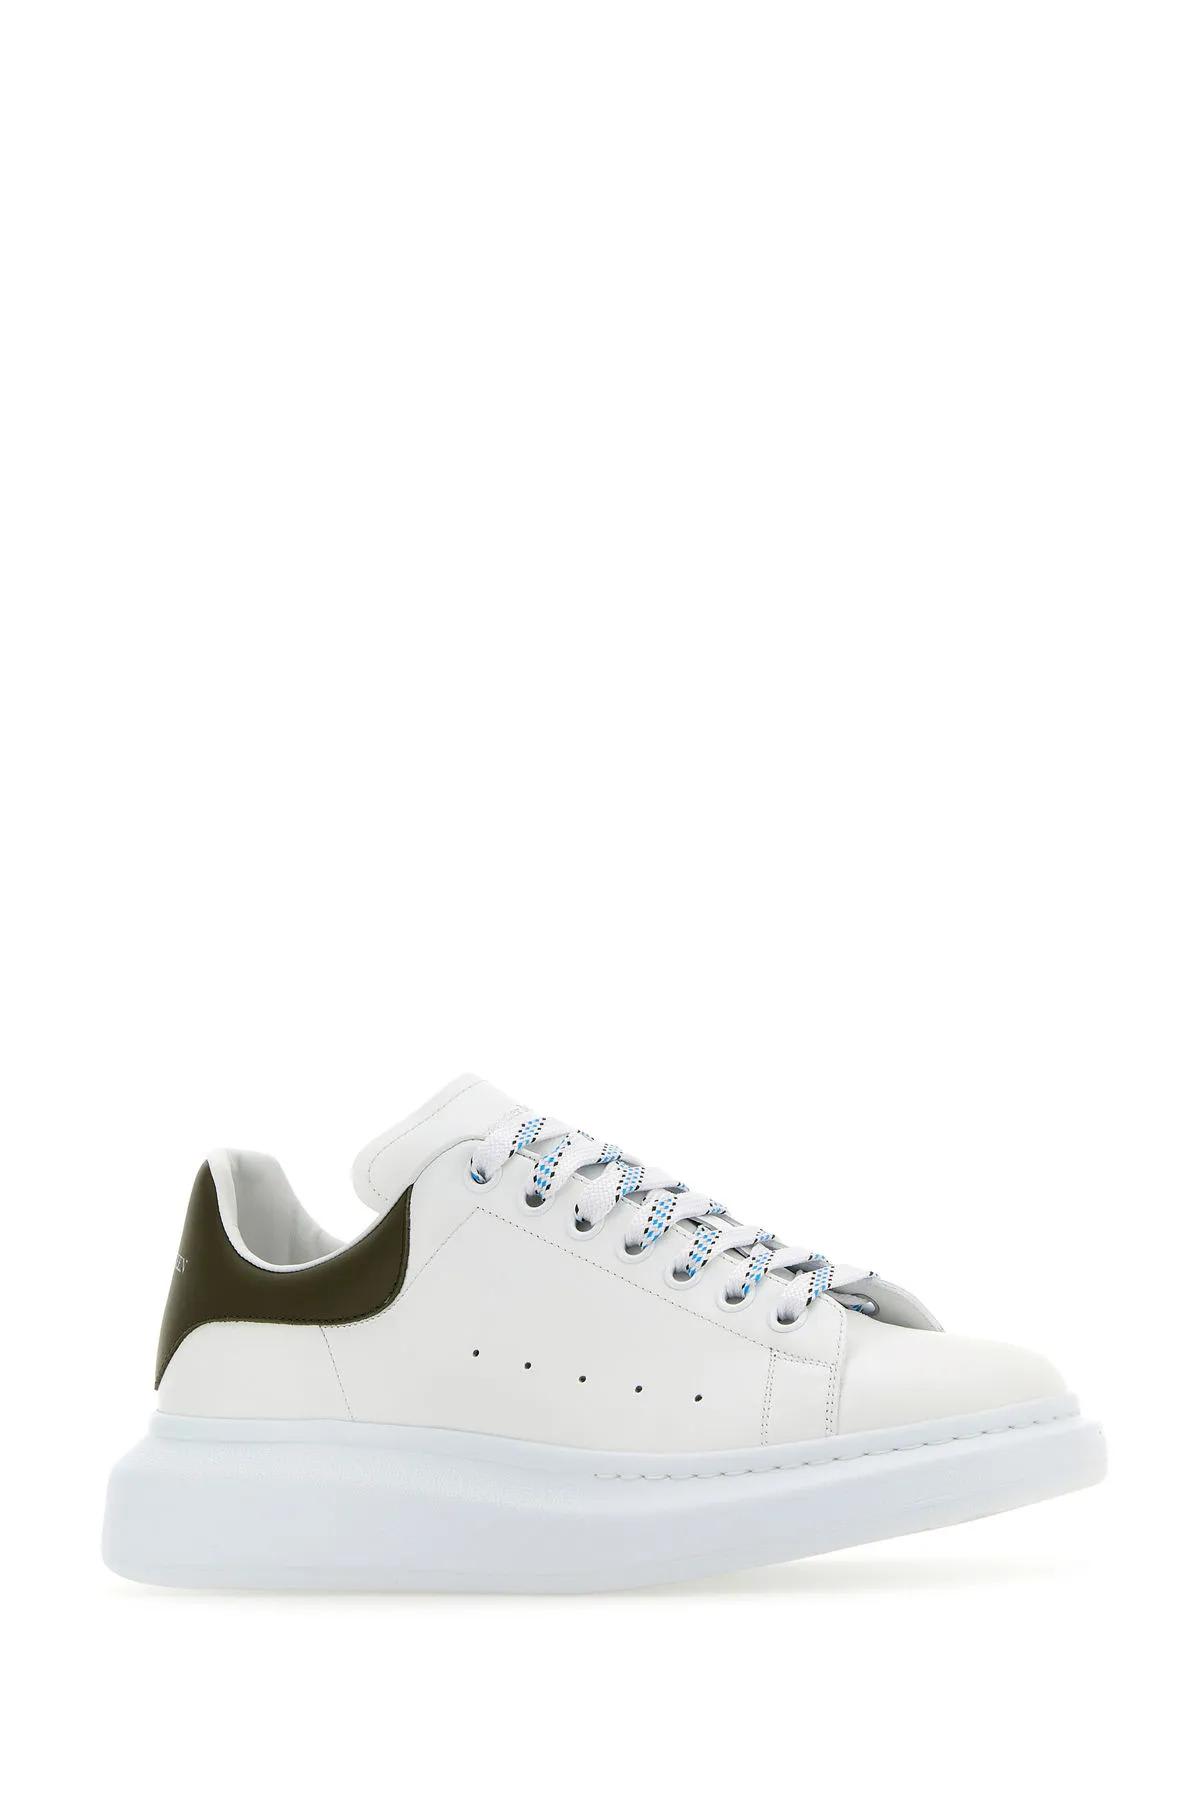 Shop Alexander Mcqueen White Leather Sneakers With Army Green Leather Heel